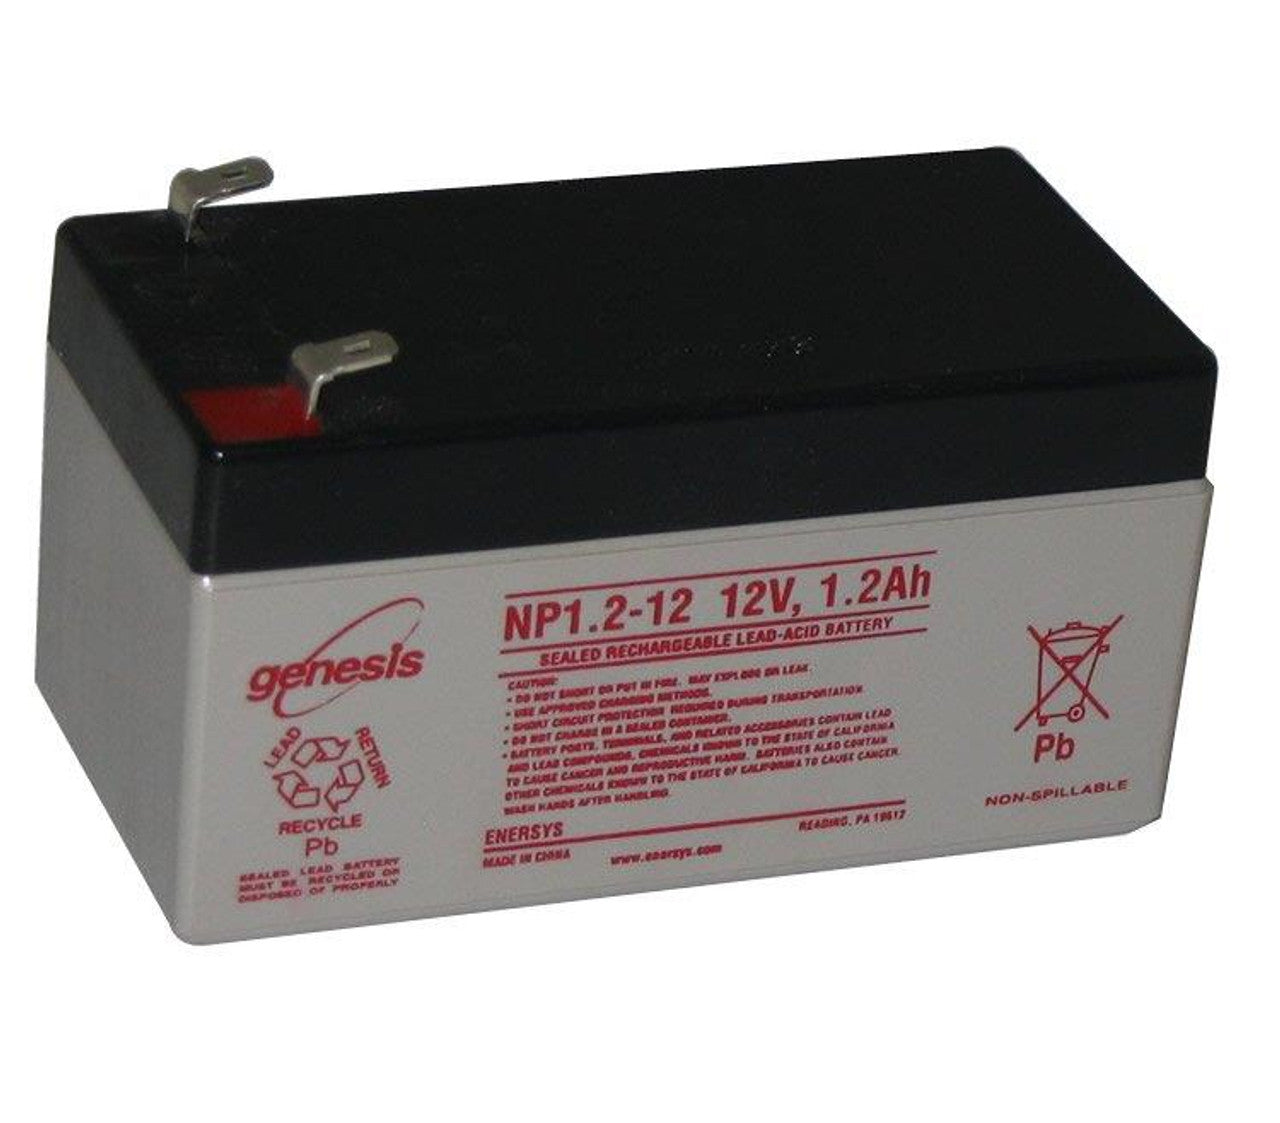 EnerSys NP1.2-12 12V 1.2Ah Sealed Rechargeable Lead-Acid Battery